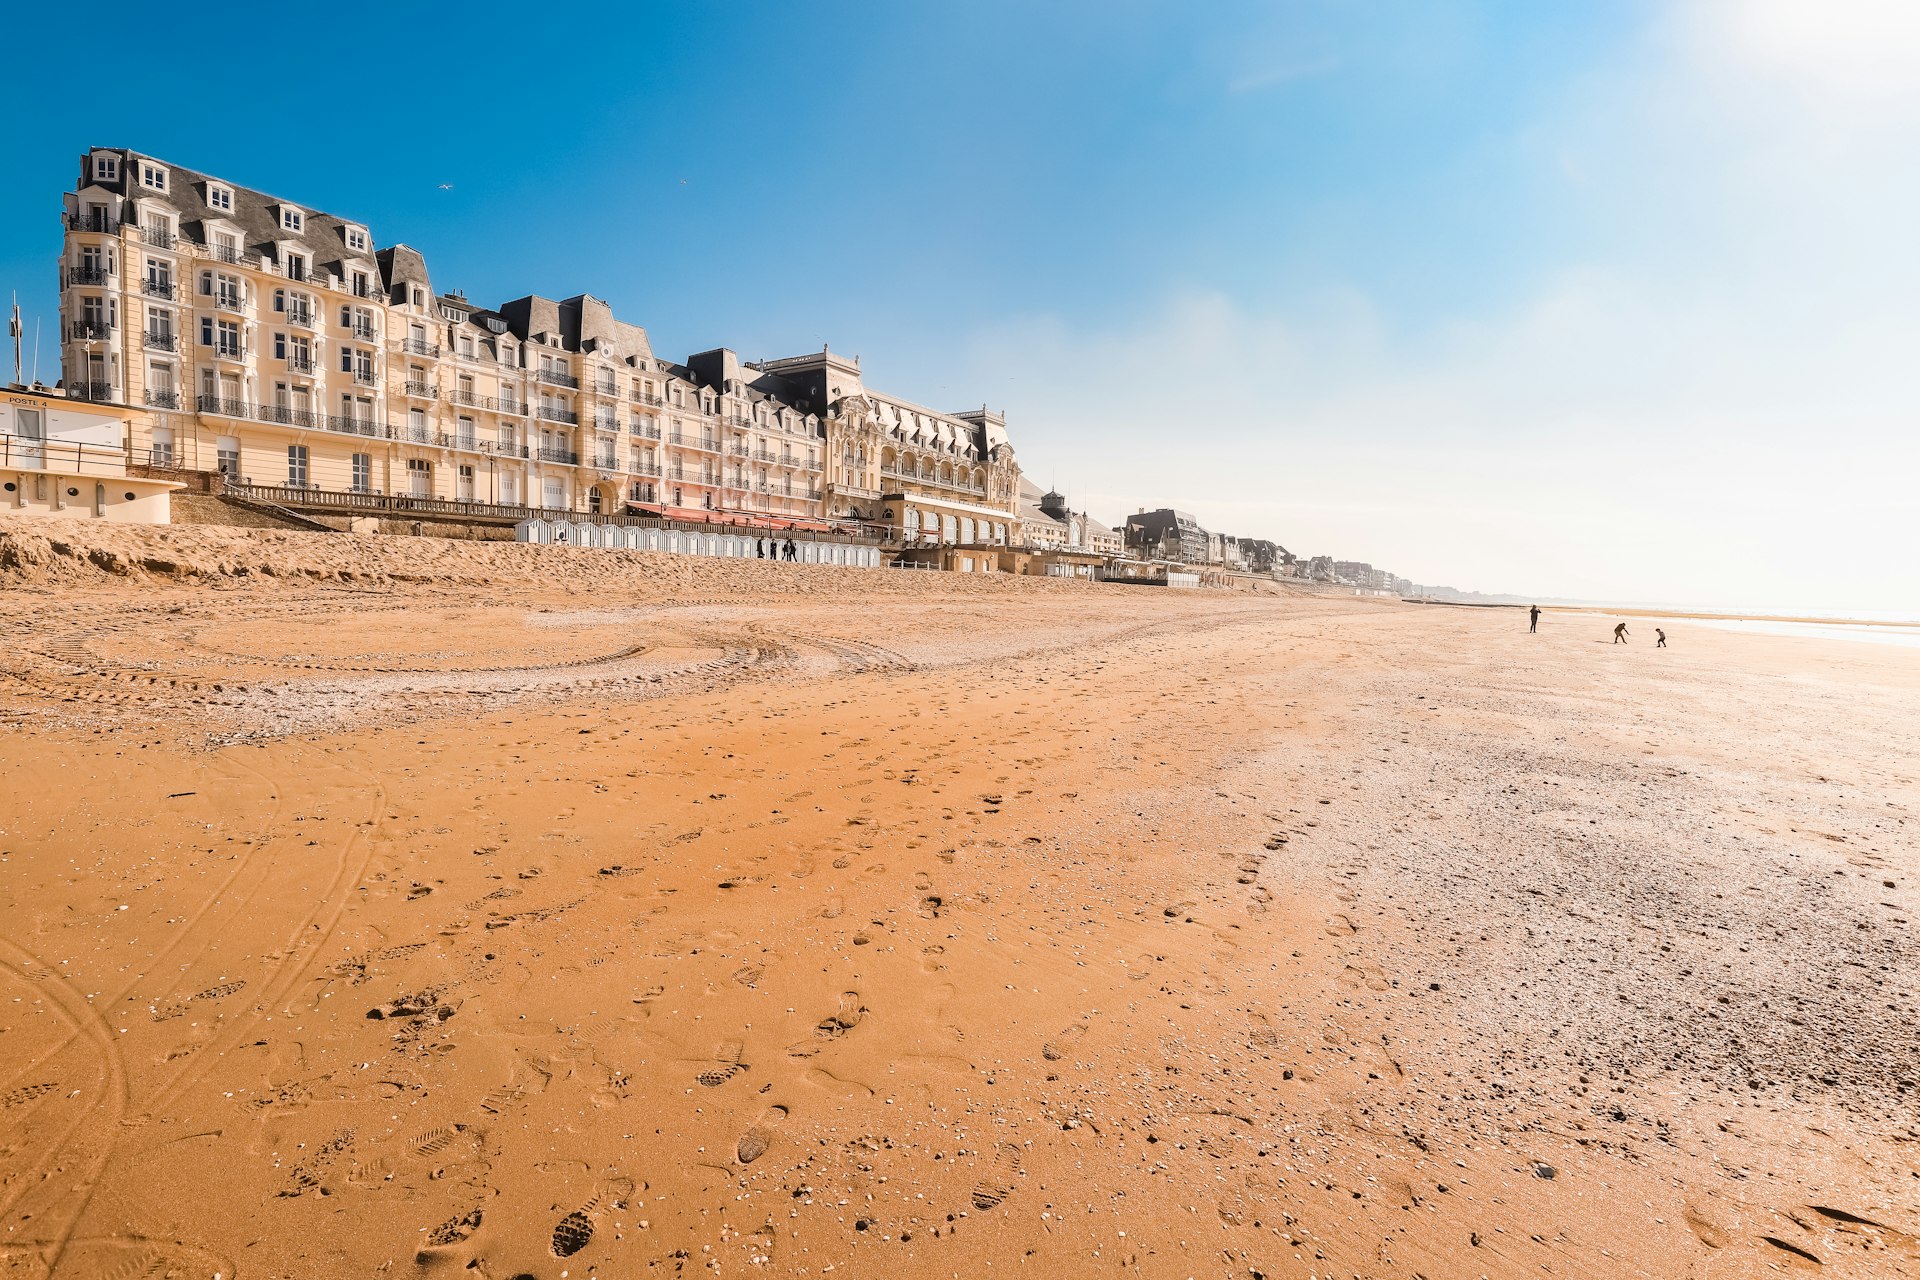 A wide, empty sandy Beach with buildings dating from the early 20th century lining the seafront